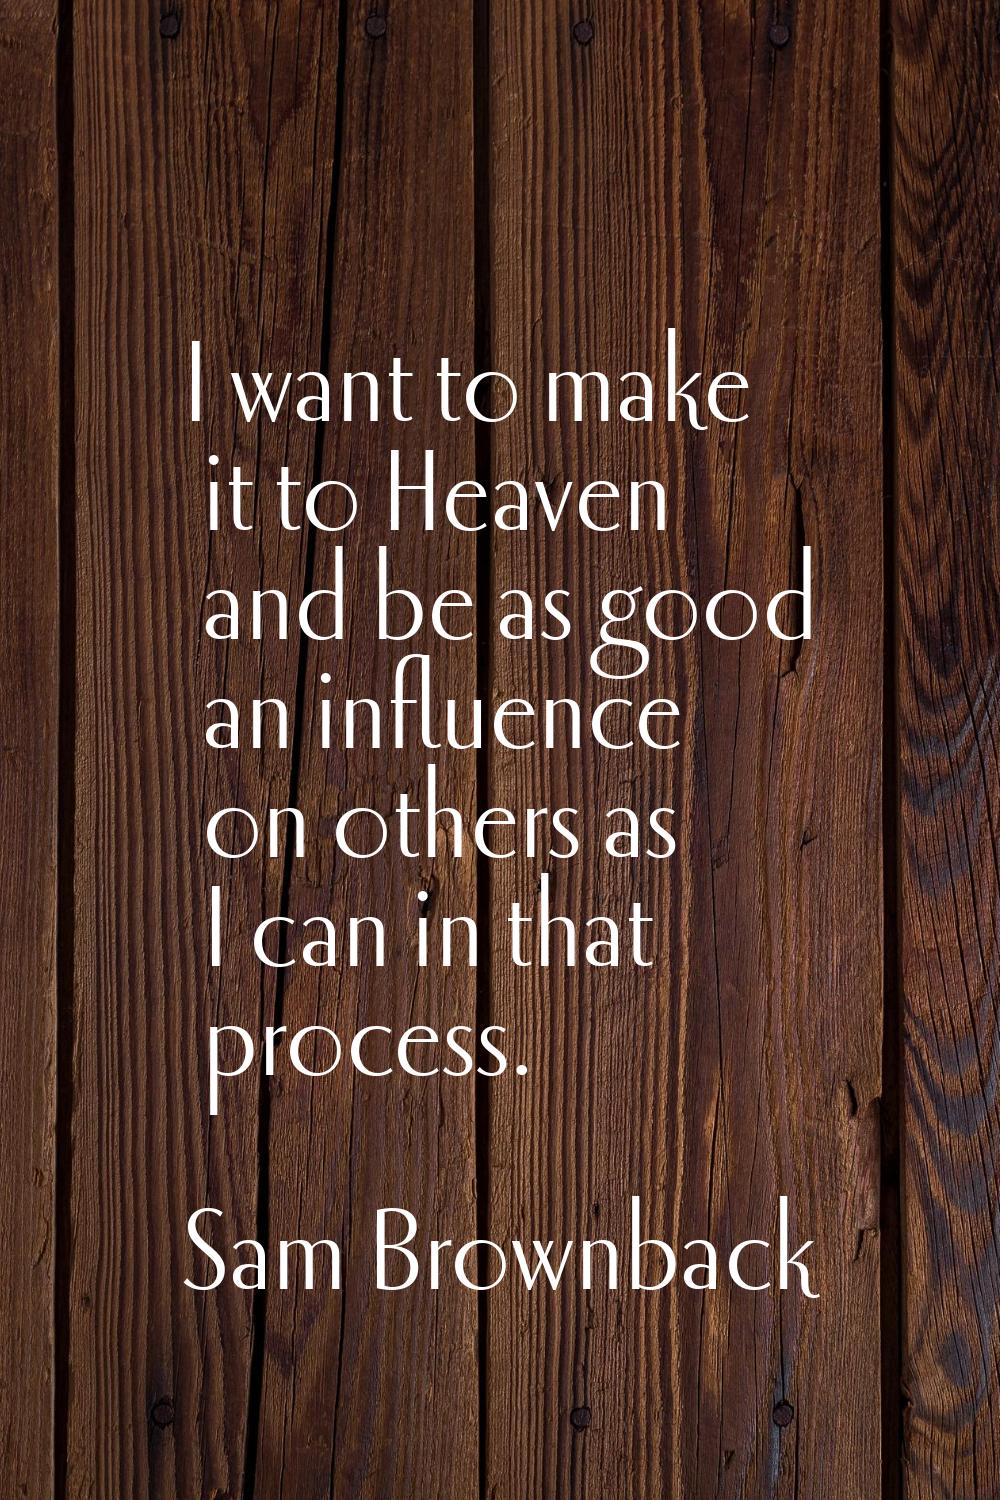 I want to make it to Heaven and be as good an influence on others as I can in that process.